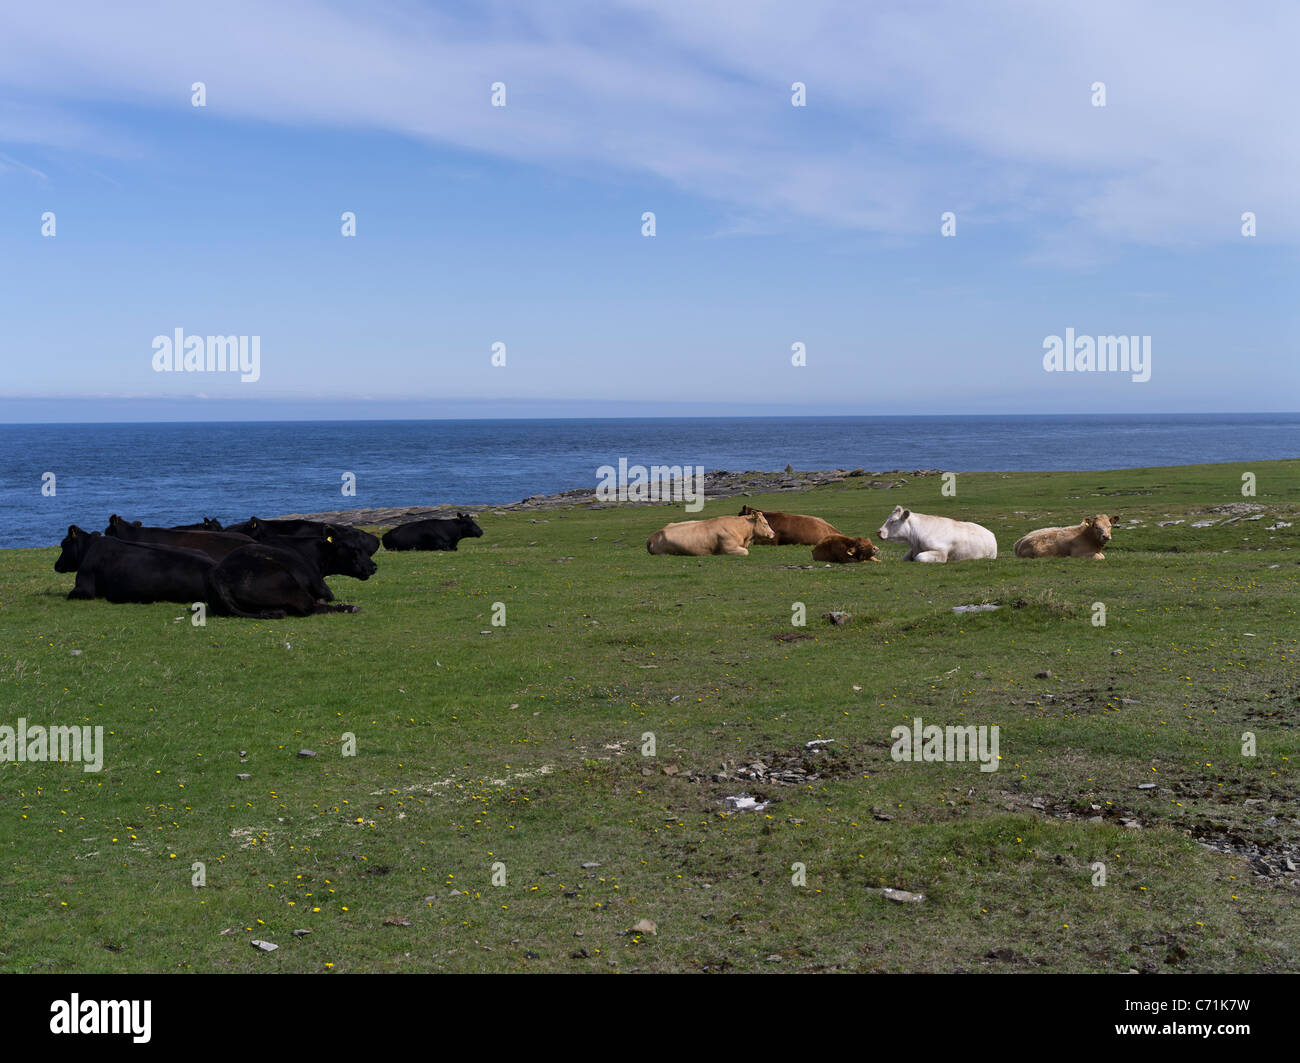 dh Mull Head PAPA WESTRAY ORKNEY Cattle sitting on seacliff grassland pasture livestock herd beef uk cows Stock Photo